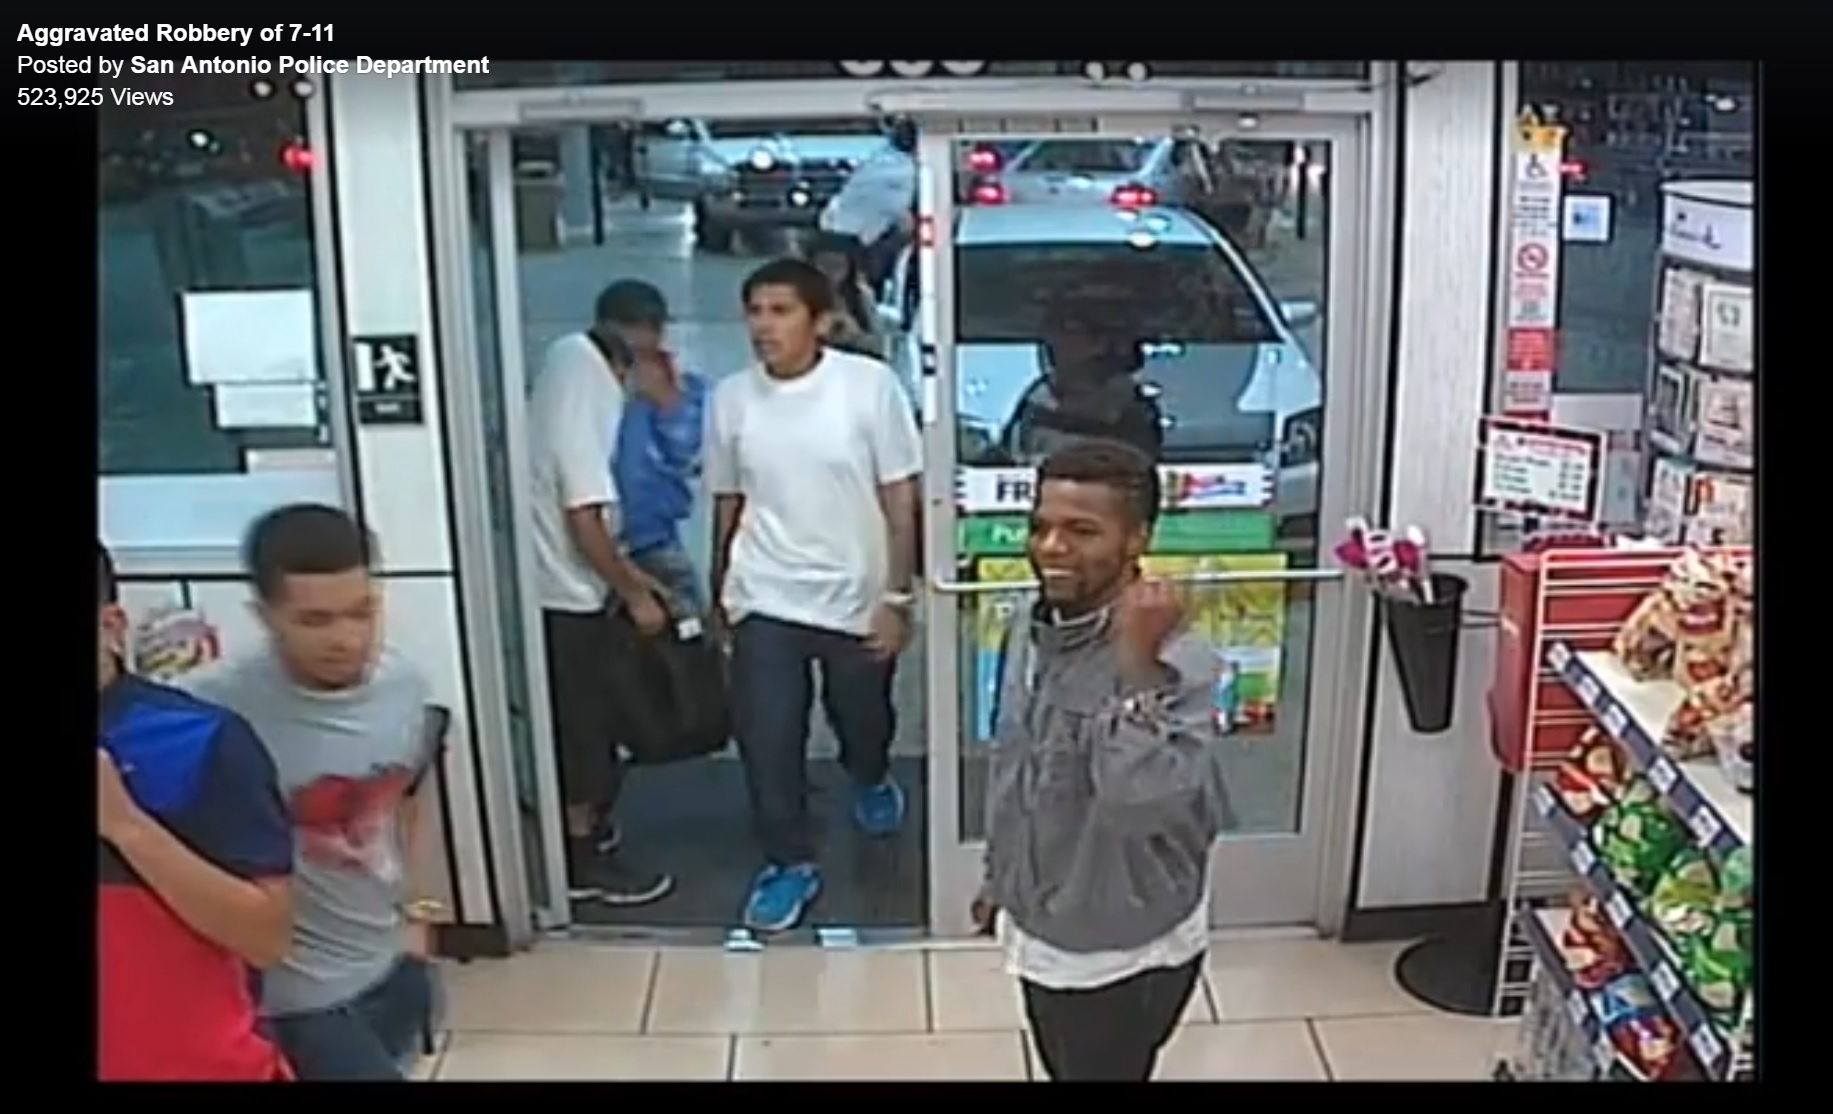 Video Shows Flash Robbery With Armed Teens In S A Police Search For Suspects